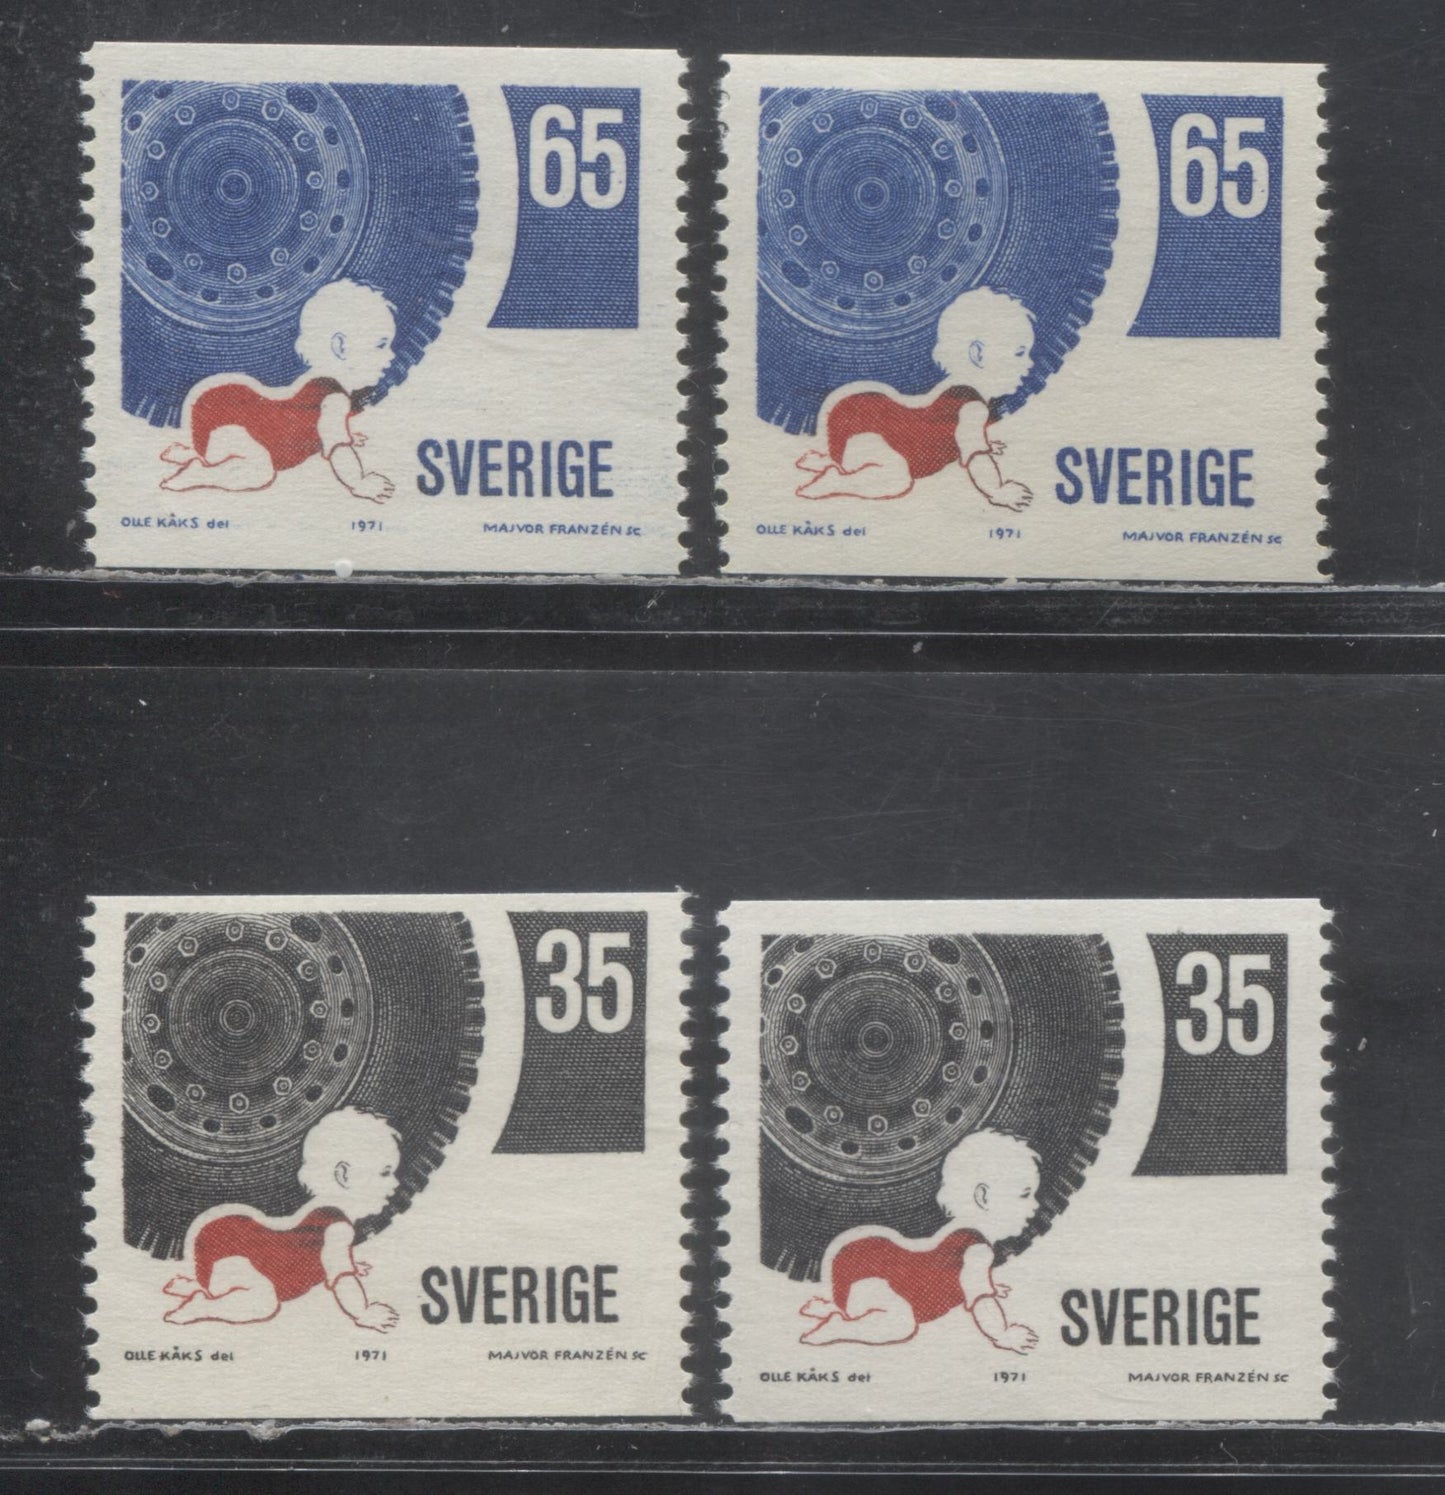 Lot 18 Sweden SC#896-897 1971 Publicity For Road Safety Issue, With and Without Tagging, 4 VFNH Singles, Click on Listing to See ALL Pictures, Estimated Value $5